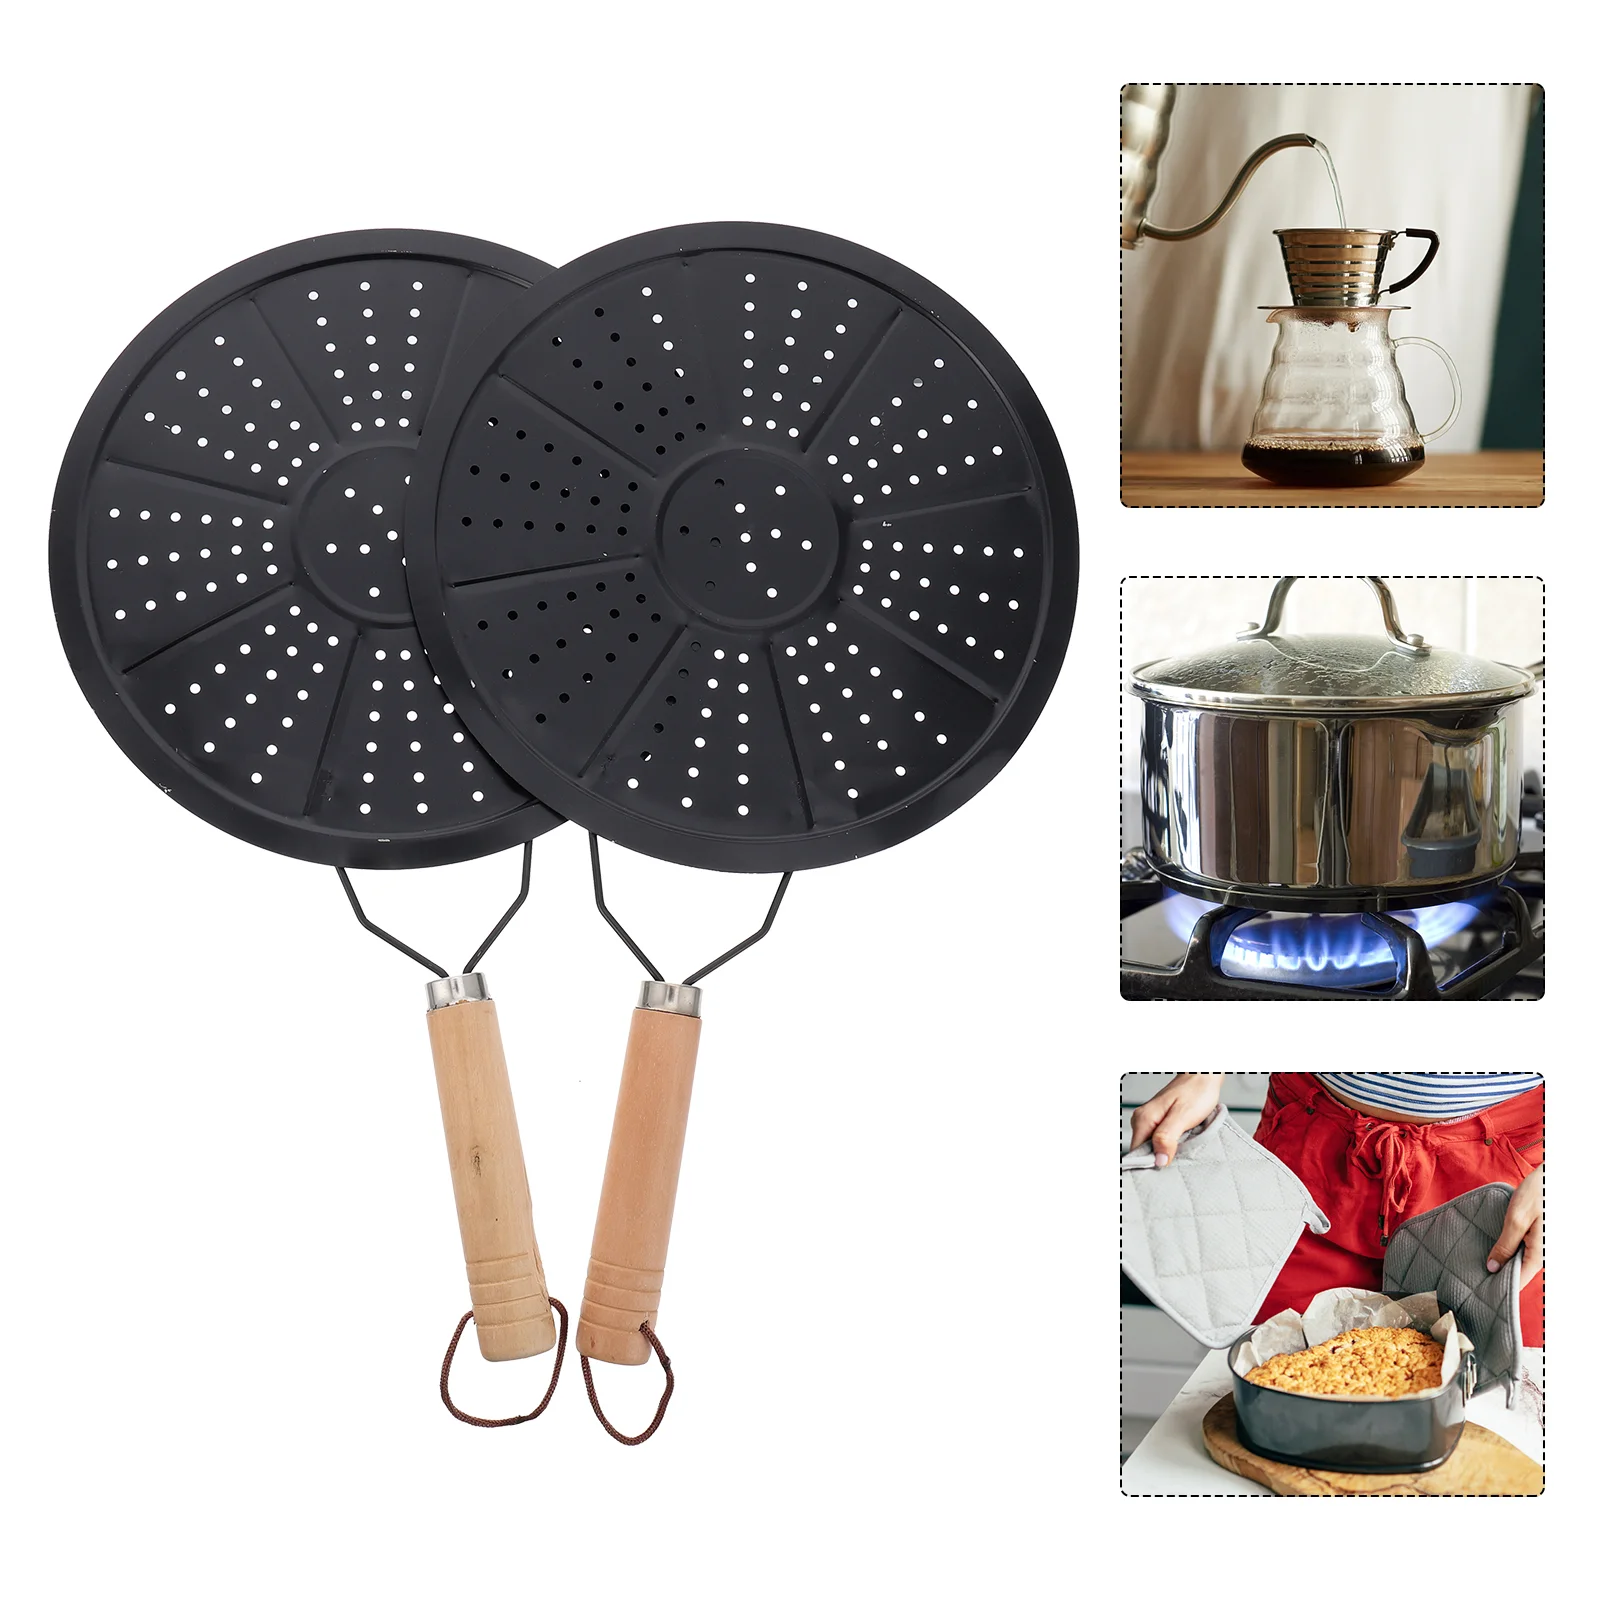 

2 Pcs Tabletop Tripod Insulation Pads Cook Ring Diffusion Plate 37X22X2.5CM Home Coffee Black Iron